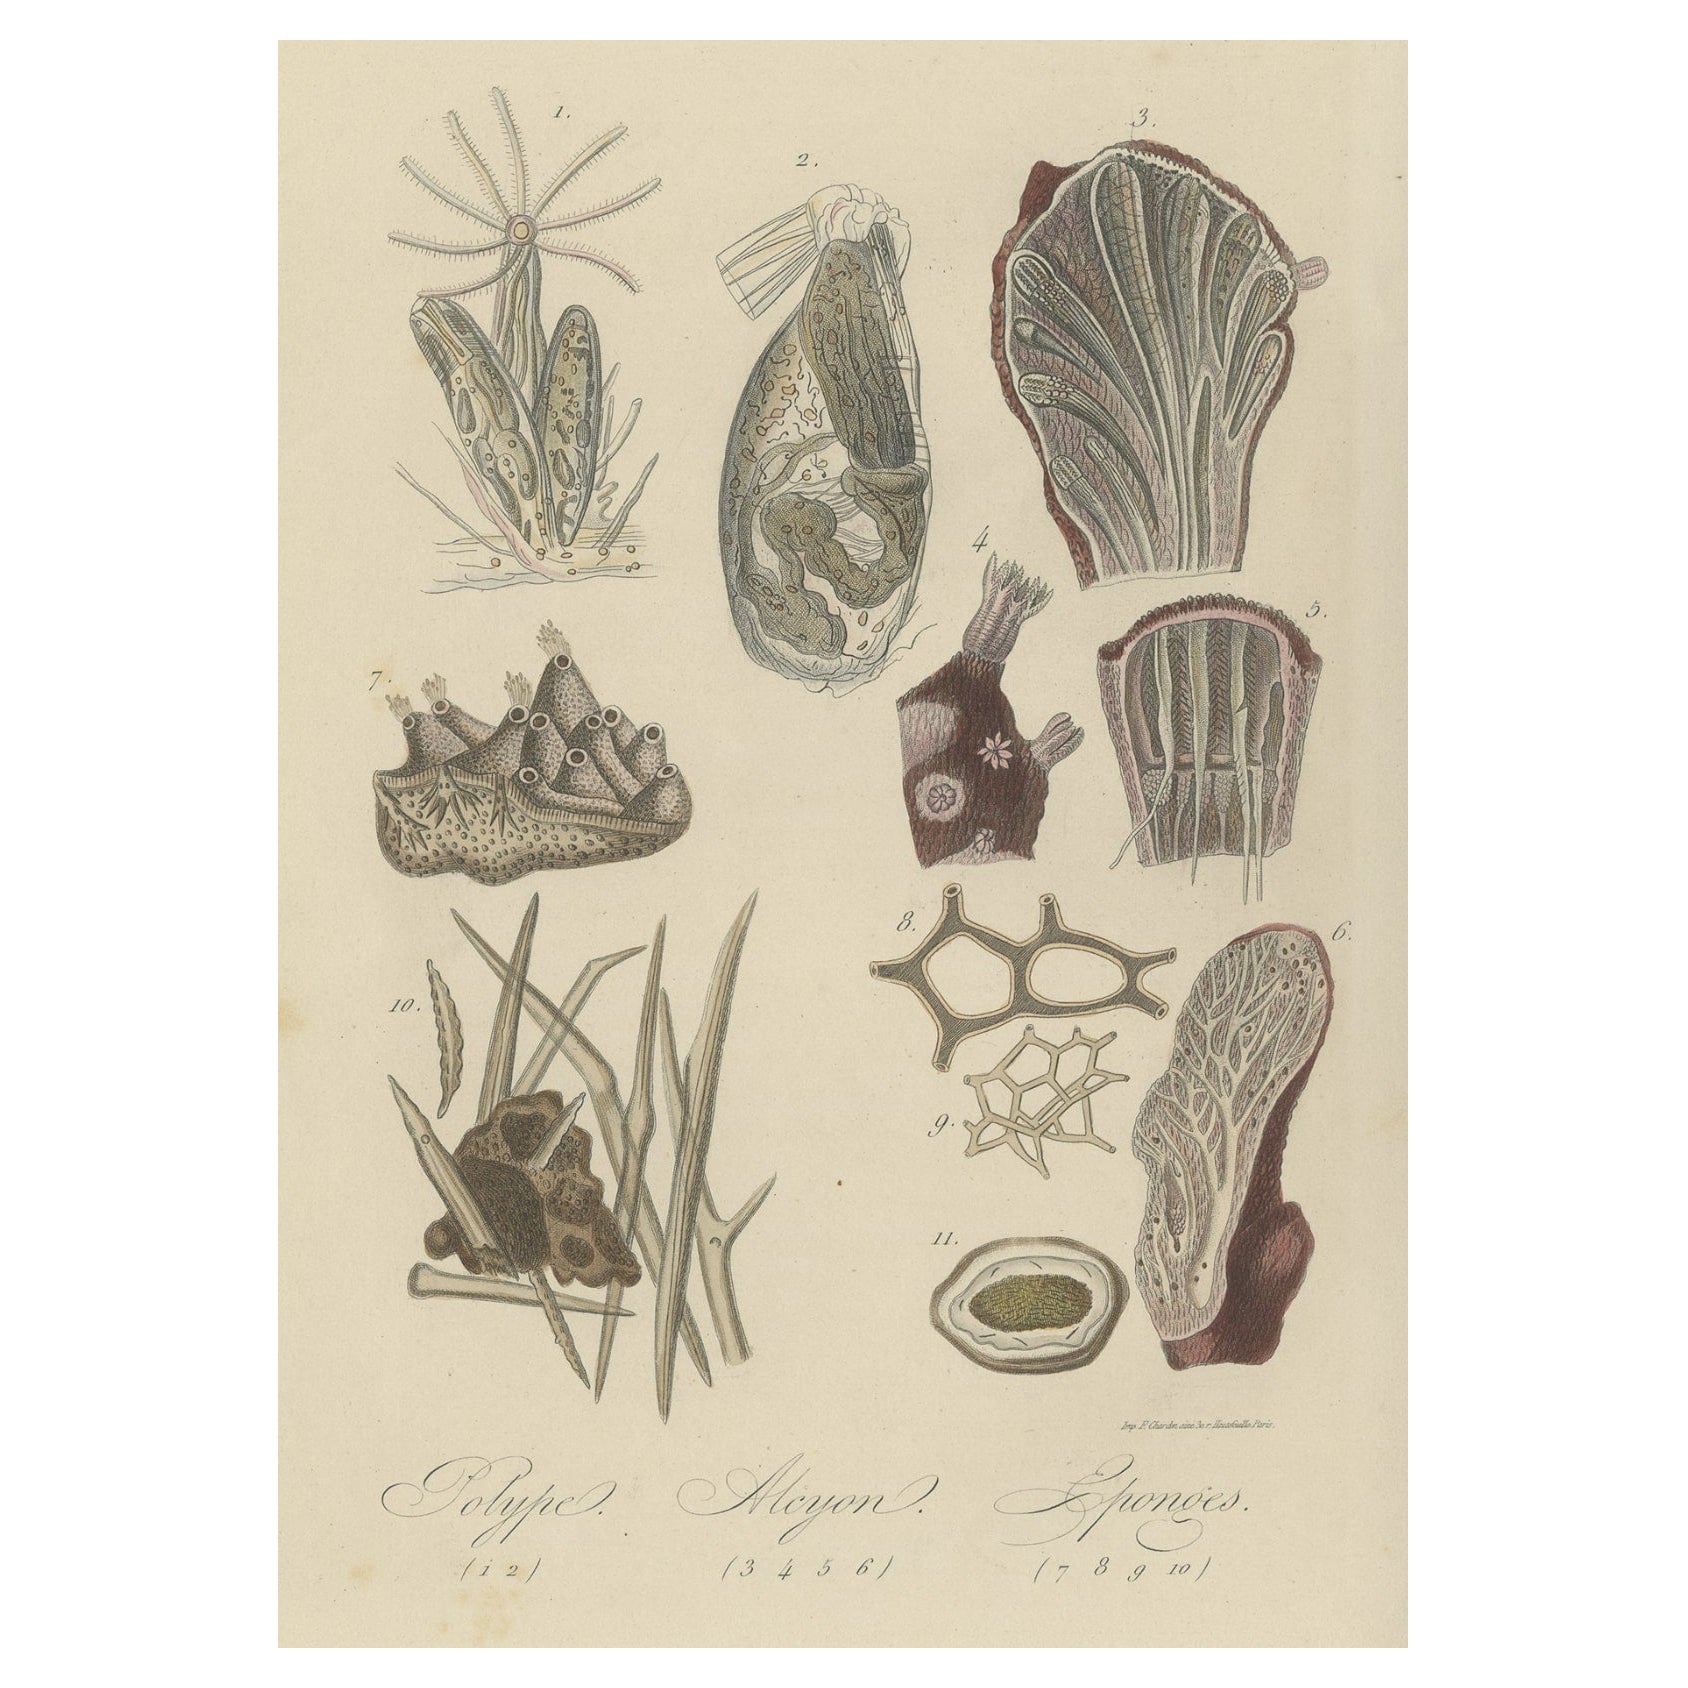 Decorative Antique Print of Various Sponges, Polypes and Other Sealife, 1854